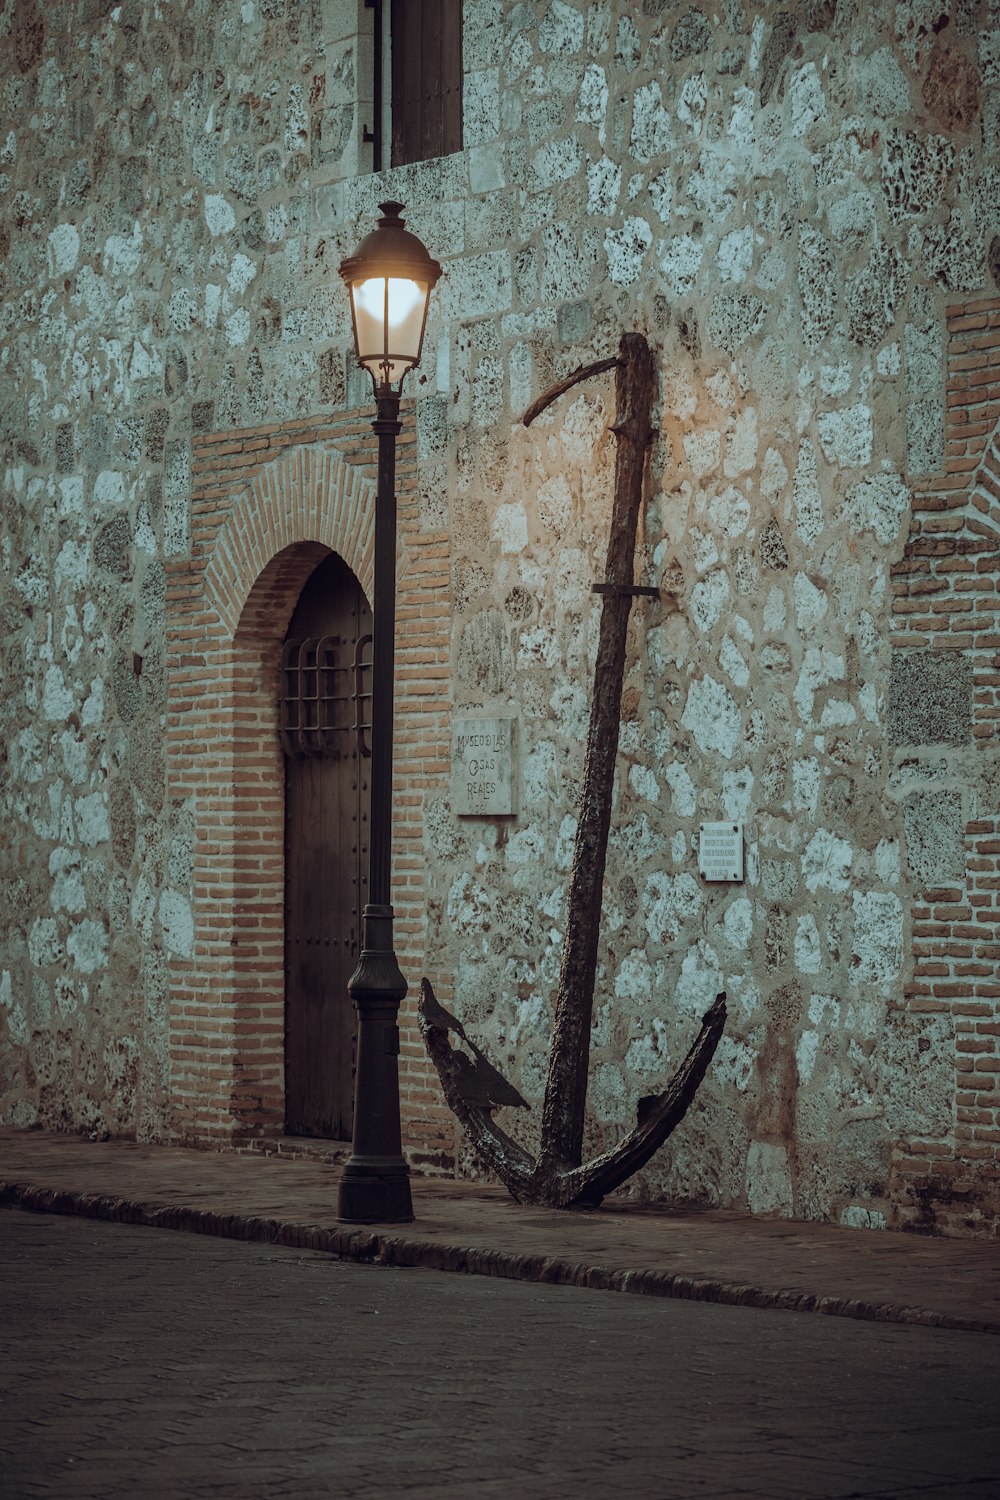 an old fashioned street lamp next to a stone building